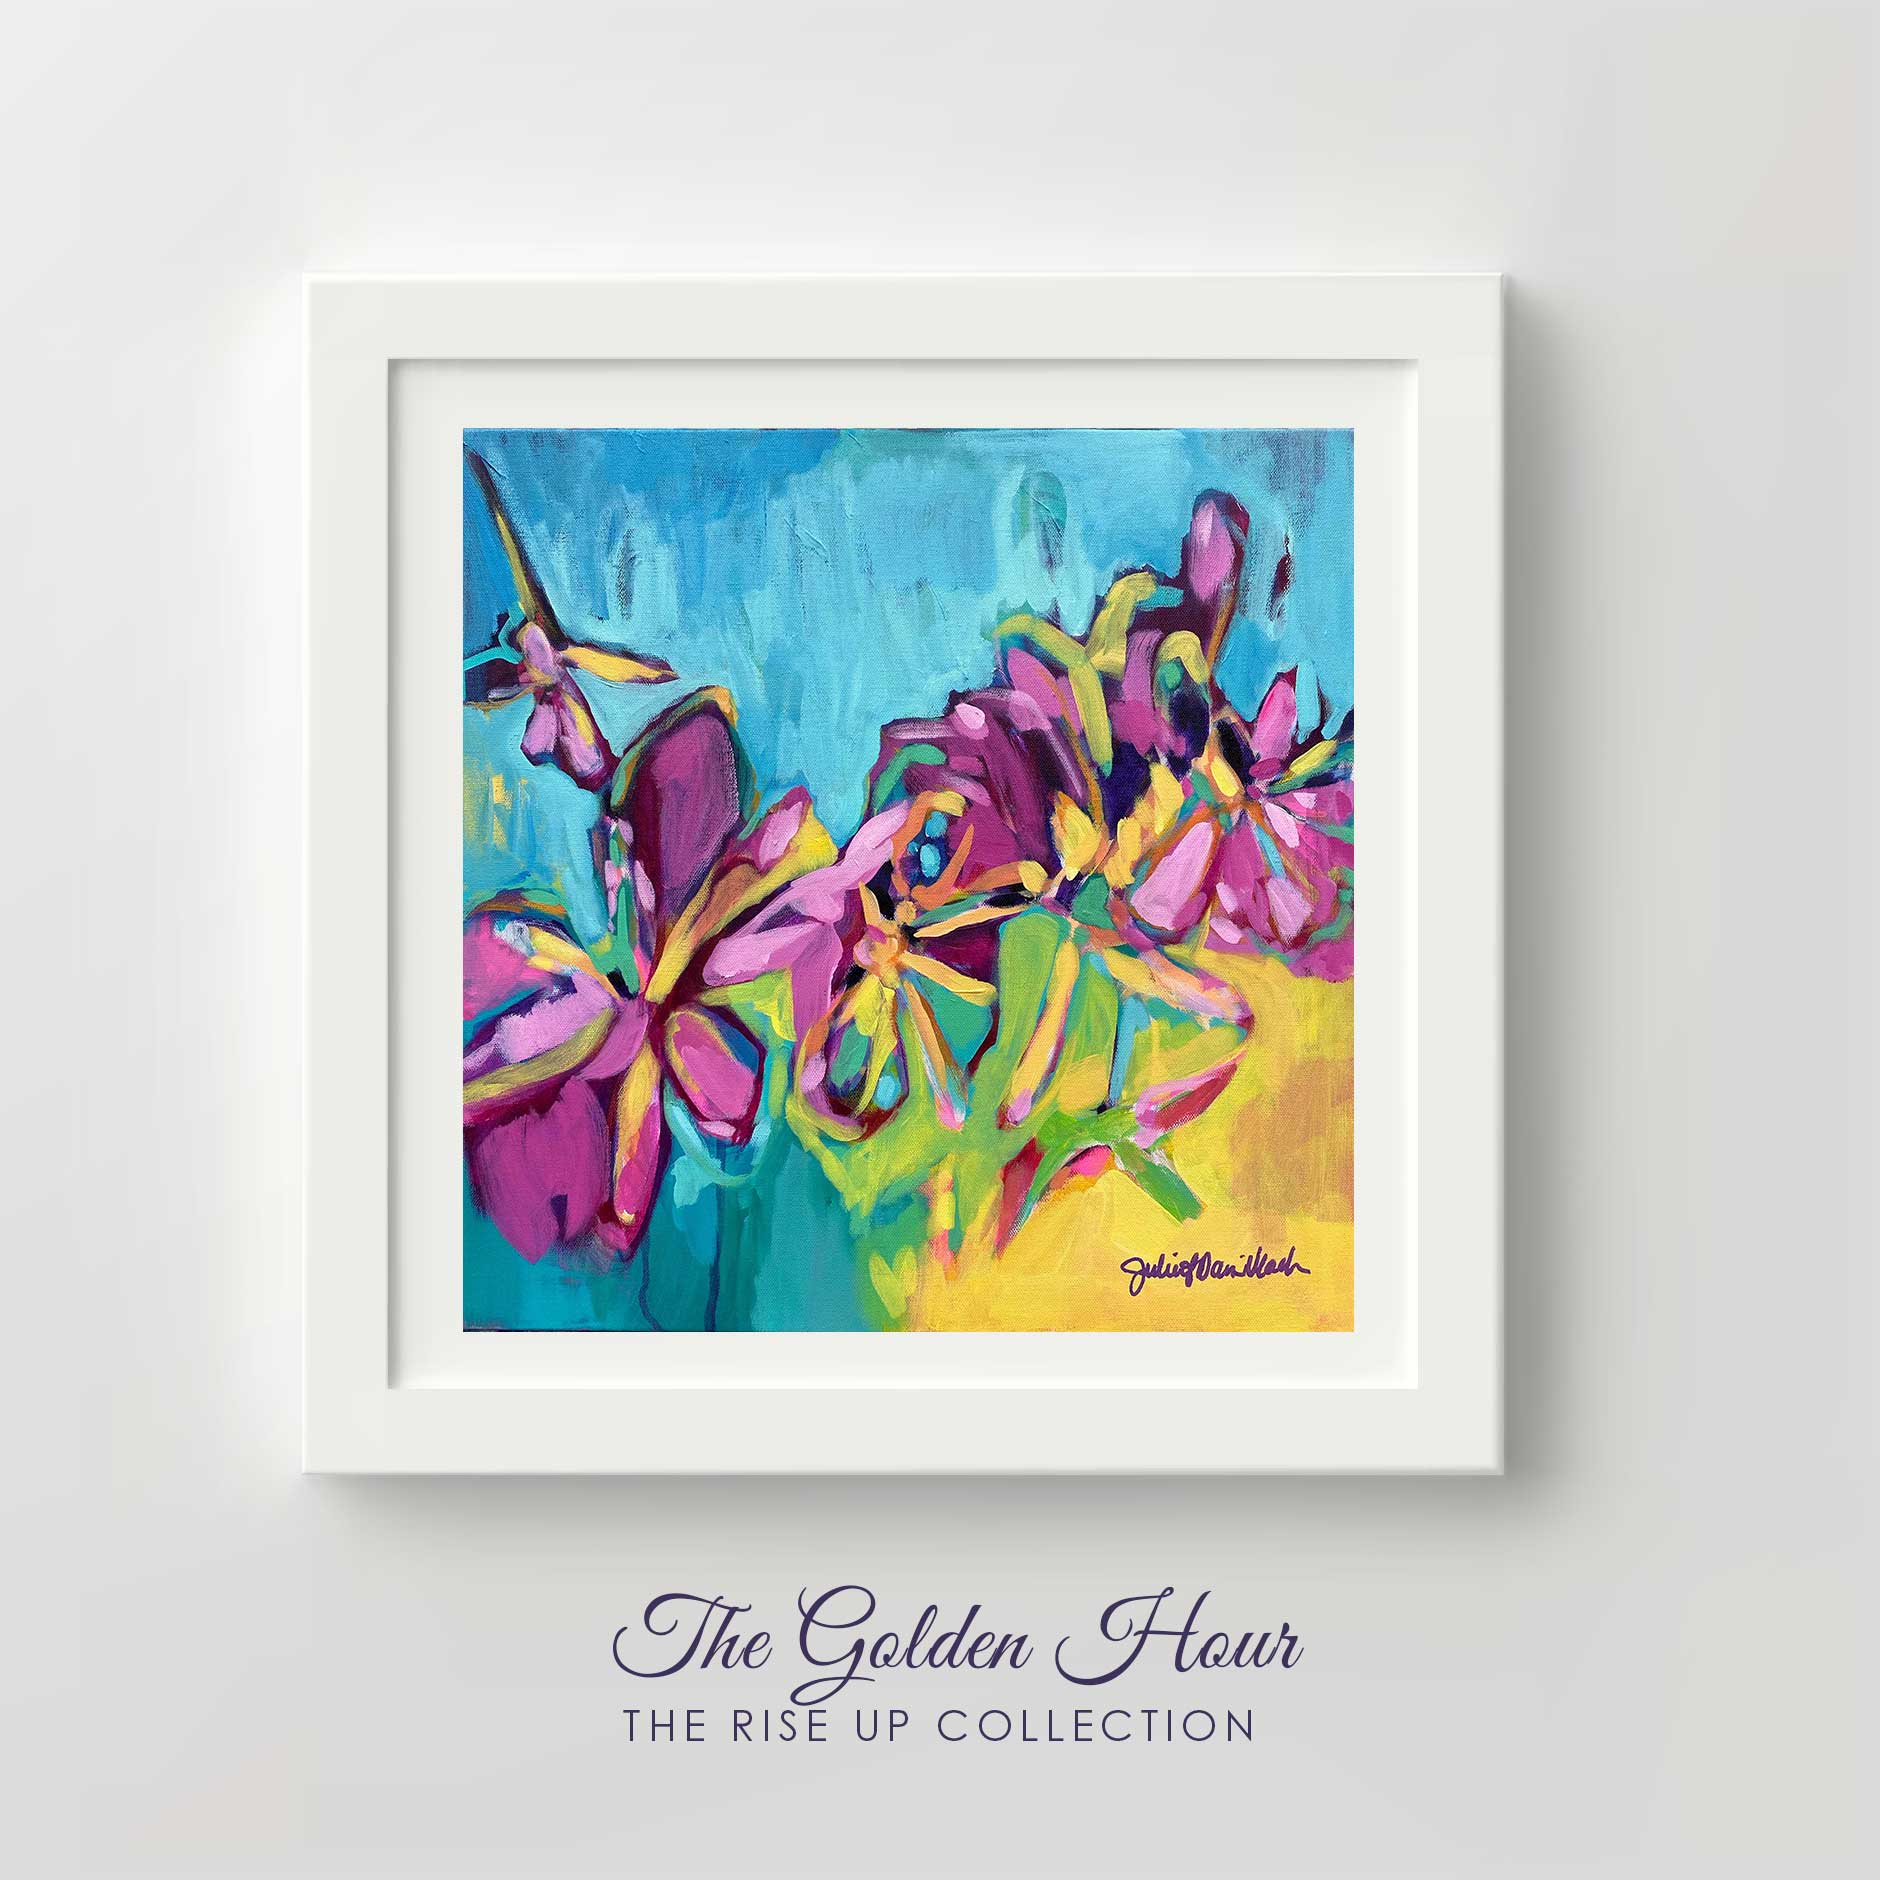 Art Prints fro Home and Office